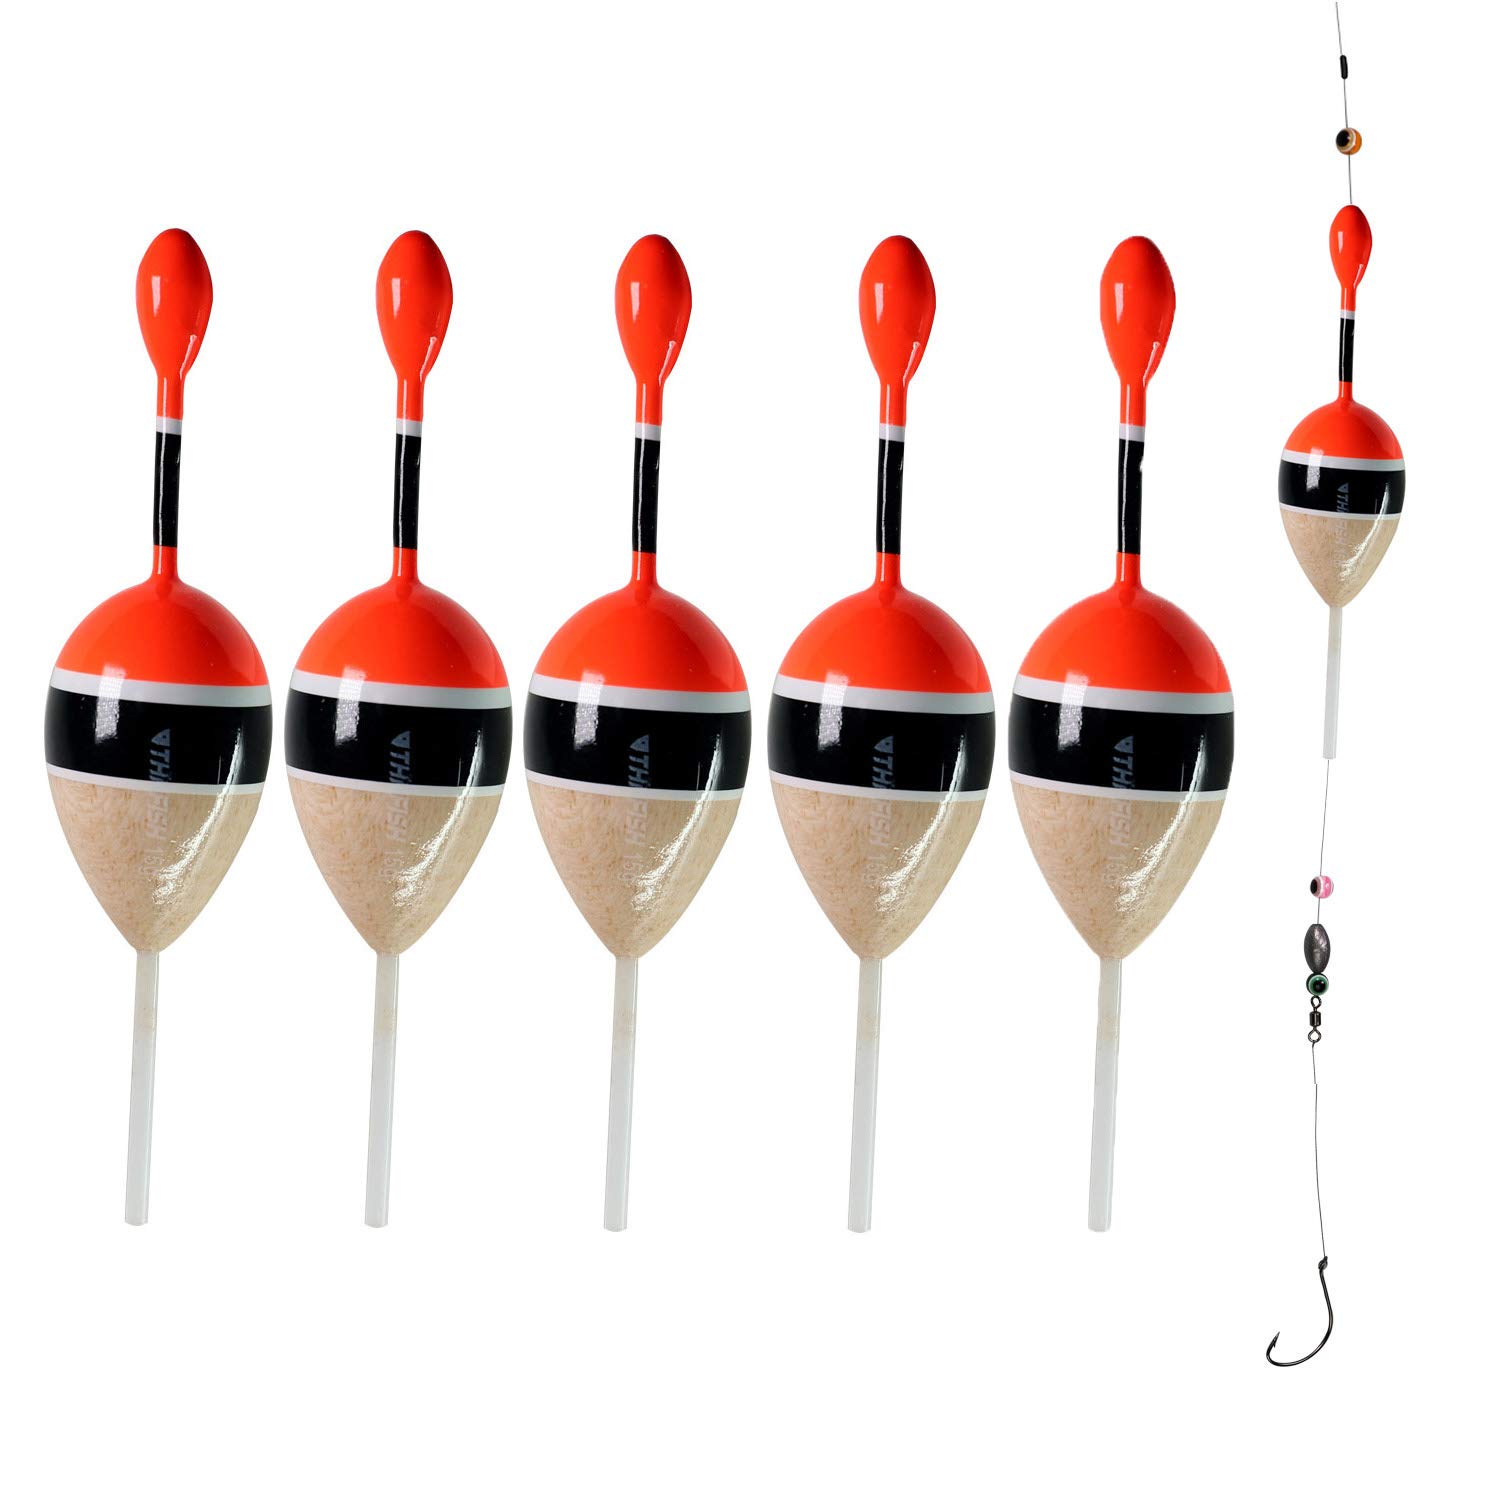 THKFISH Fishing Floats Bobbers Slide Floats Balsa Fishing Bobber Slip  Bobbers for Crappie Panfish Trout Bass (1/2oz 2x5.28) (1/6 1.6x4.8)  5Pcs Wood and Red 1/6 oz 1.6x4.8 - 5Pcs